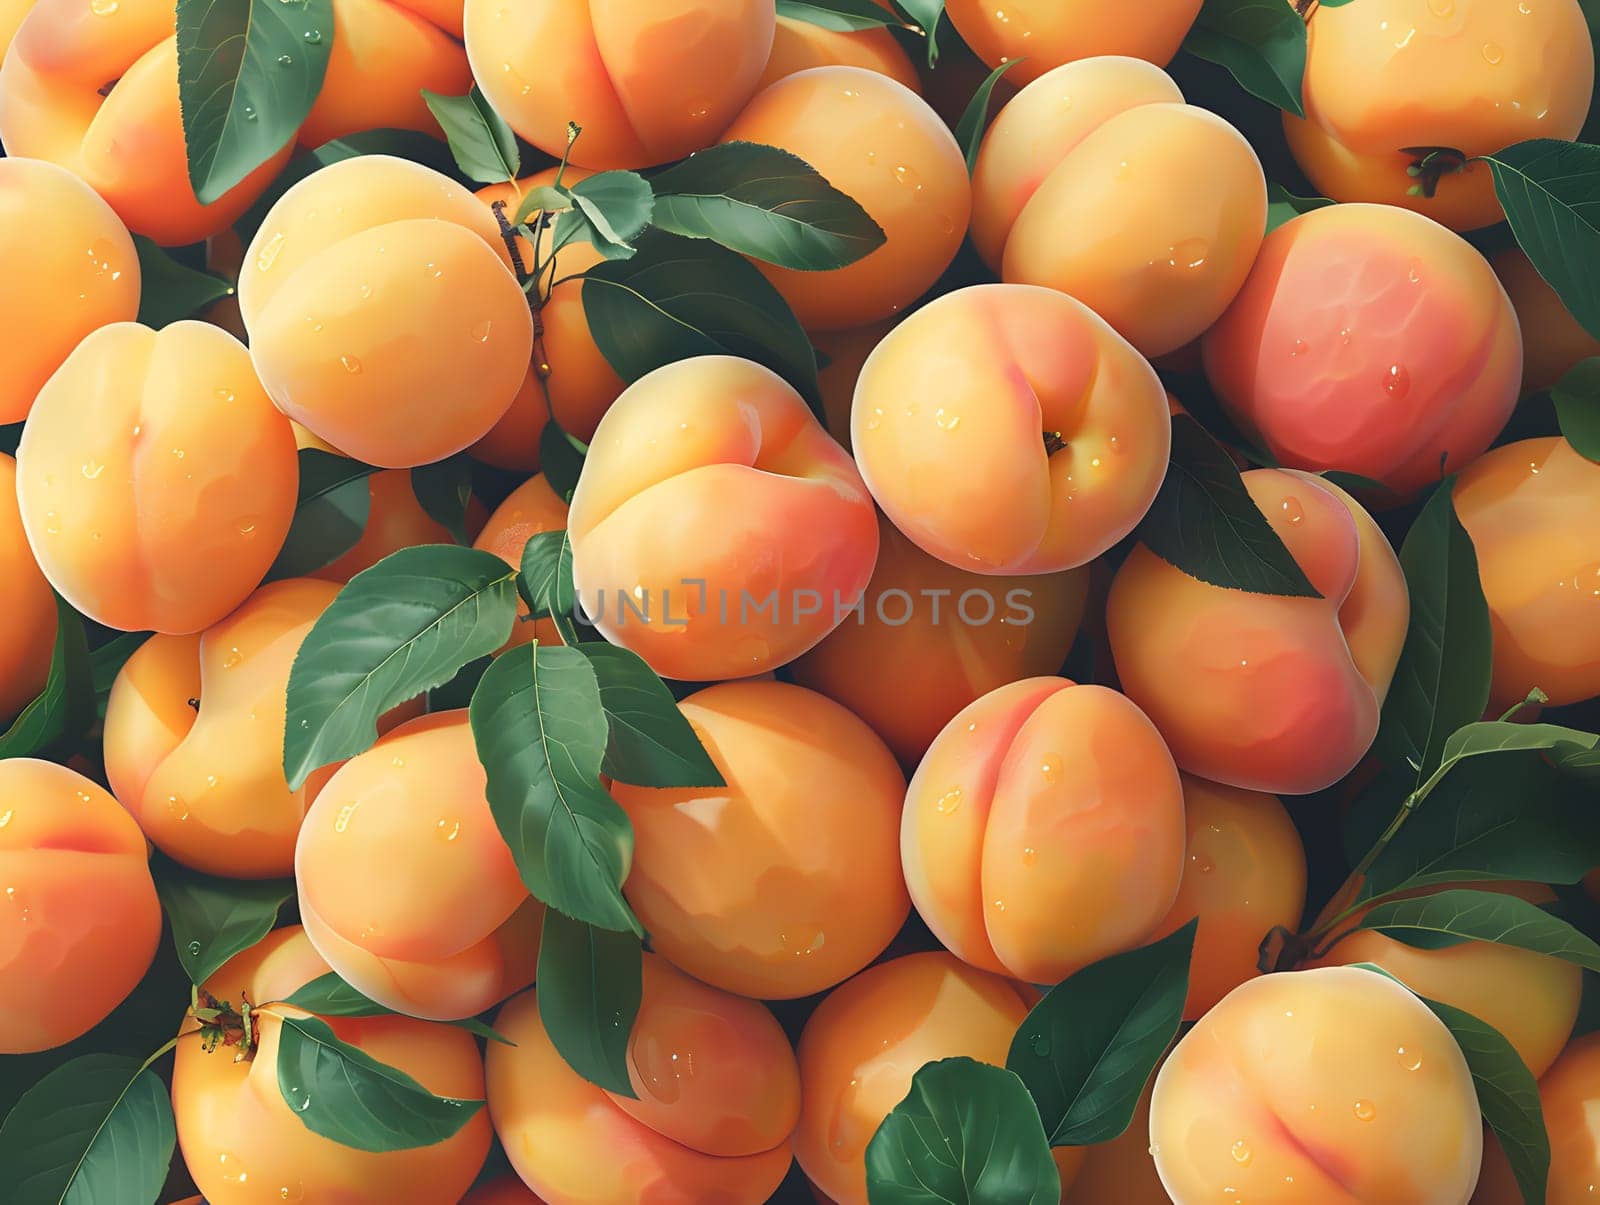 A pile of juicy apricots with vibrant green leaves, a delicious and nutritious fruit that is a staple food packed with natural goodness and perfect for cooking or snacking